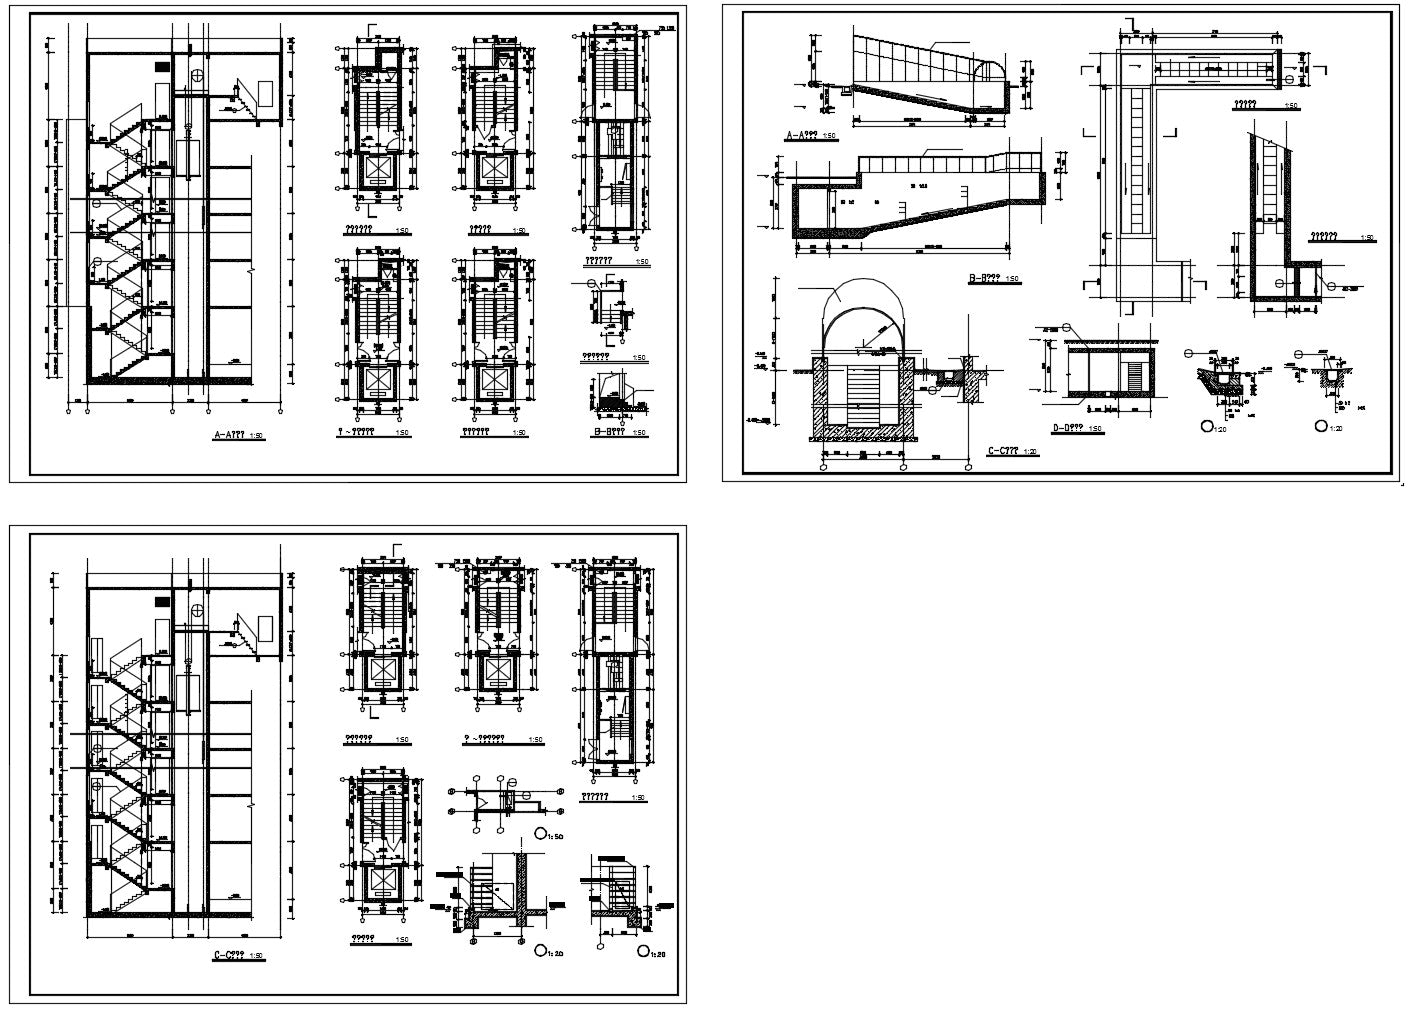 Over 500 Stair Details-Components of Stair,Architecture Stair Design